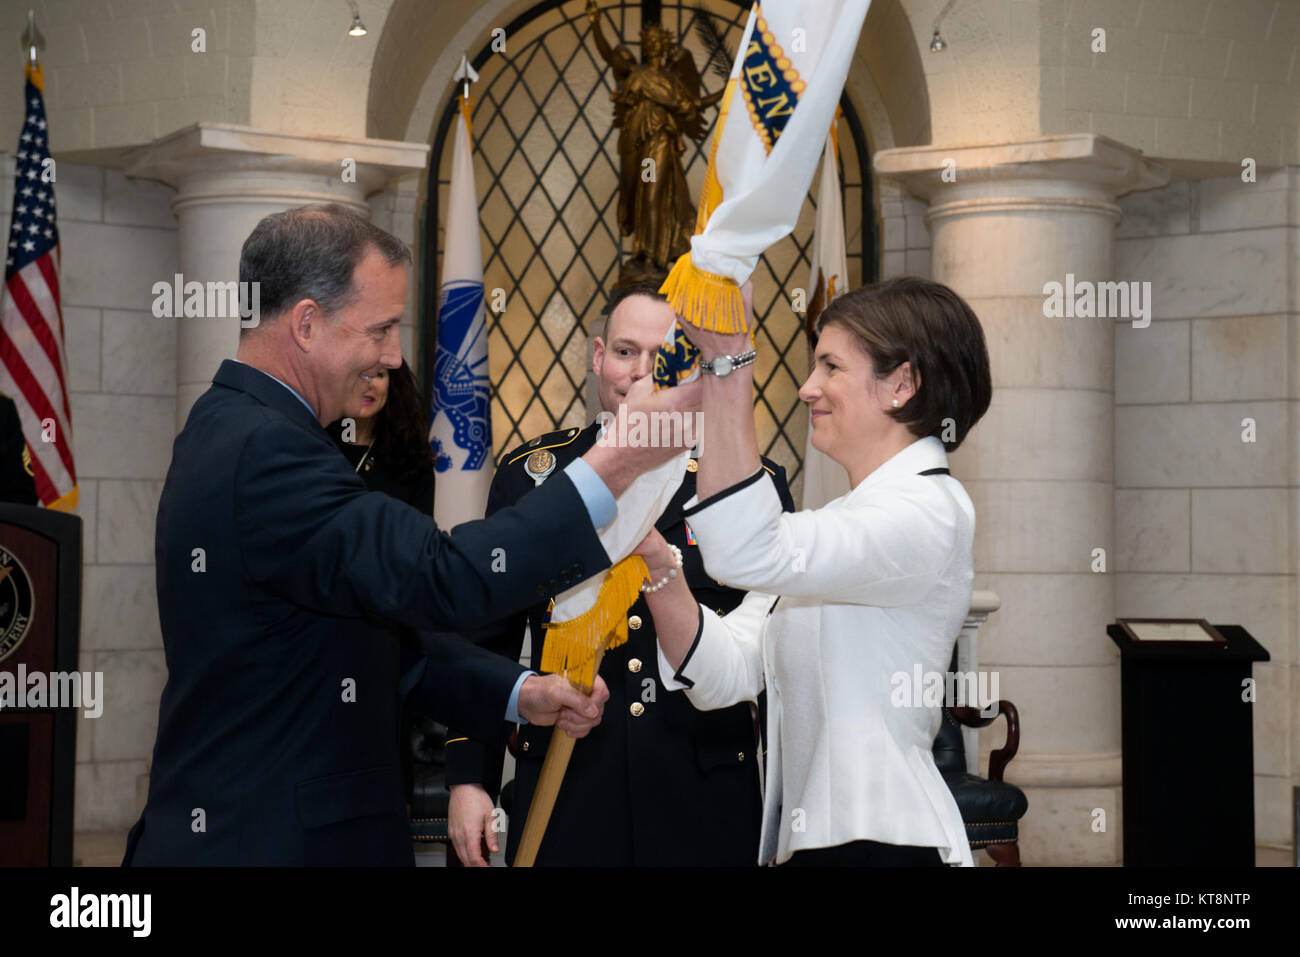 Gerald B. O’Keefe, left, administrative assistant to the Secretary of the Army, hands a Senior Executive Service flag to Katharine Kelley, superintendent, Arlington National Cemetery, during her SES induction ceremony, March 2, 2017, in Arlington, Va. The ceremony took place in the lower level of the Memorial Amphitheater in the cemetery. (U.S. Army photo by Rachel Larue/Arlington National Cemetery/released) Stock Photo